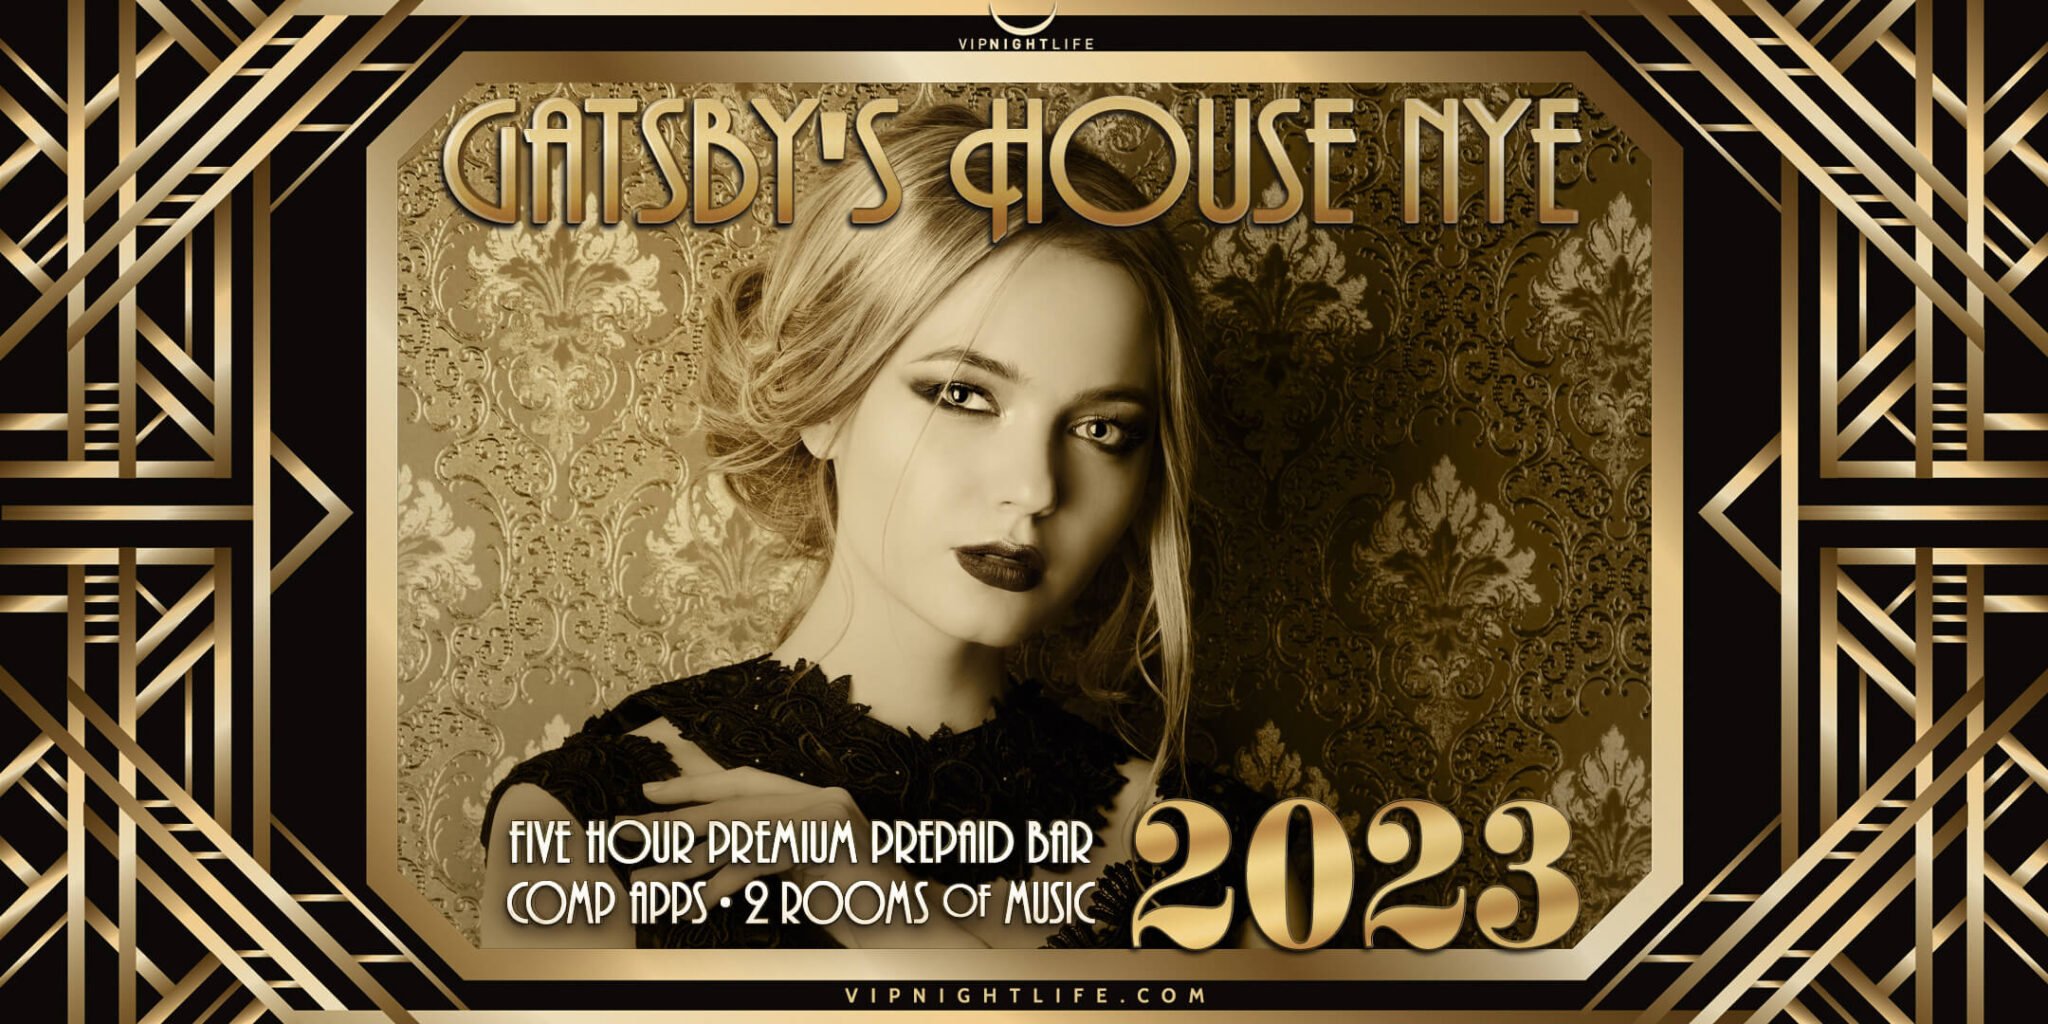 2023 Raleigh New Year's Eve Party Gatsby's House VIP Nightlife